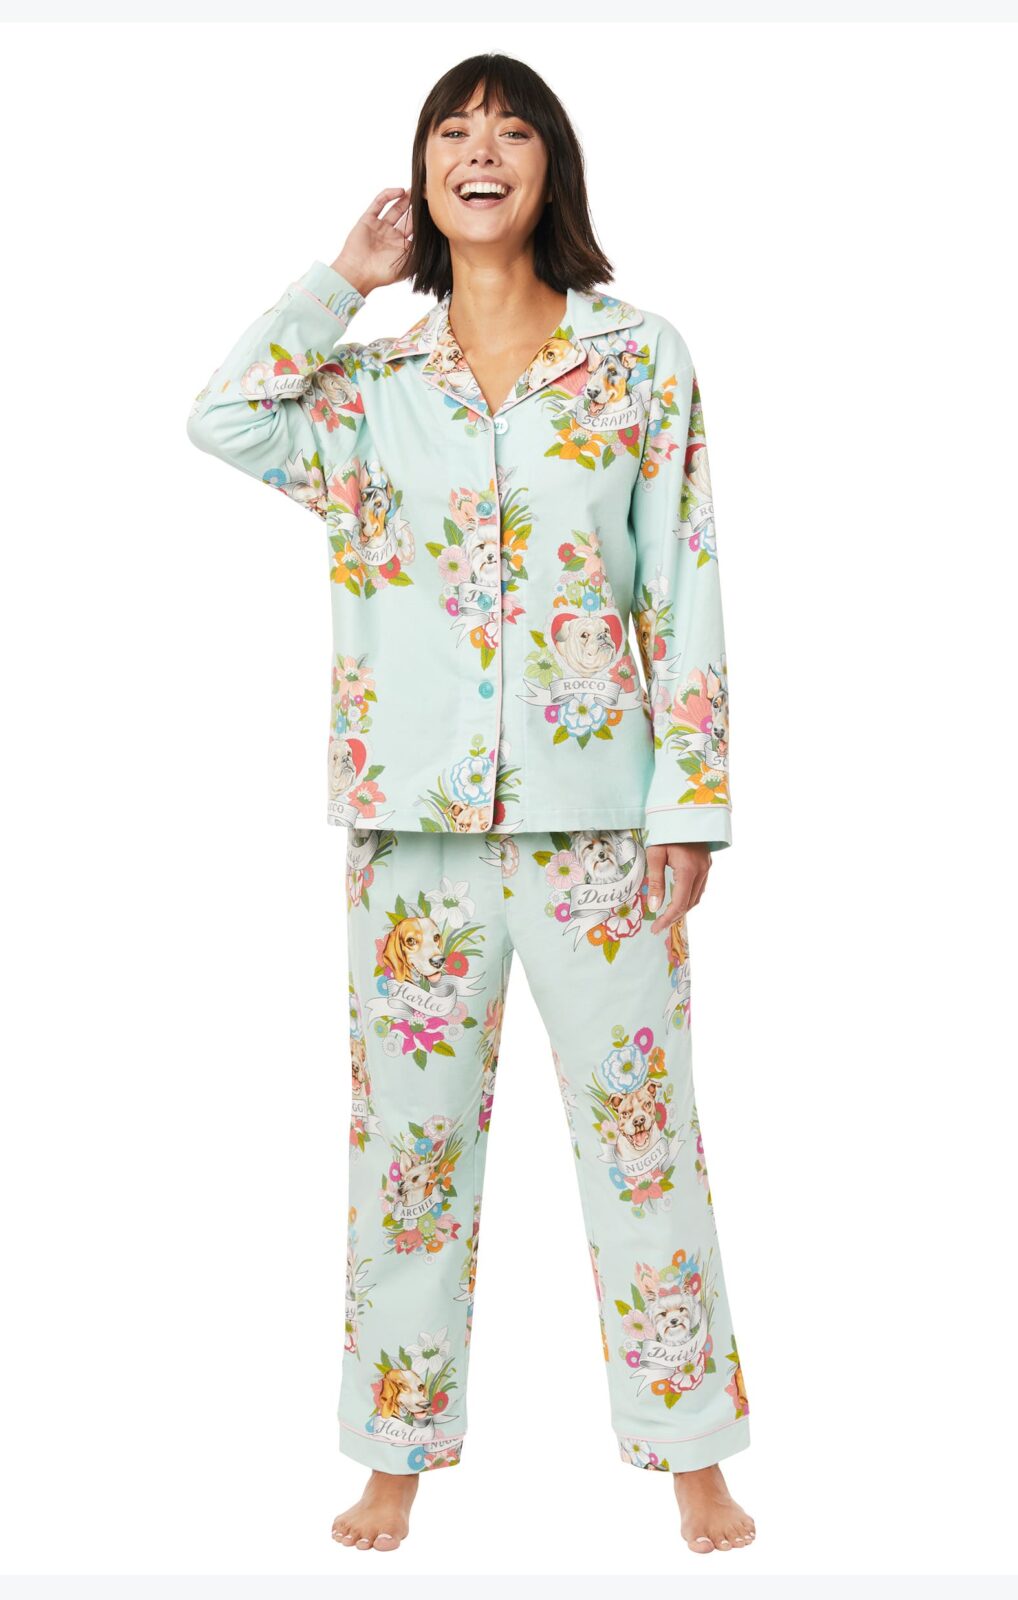 Flannel pajamas for women